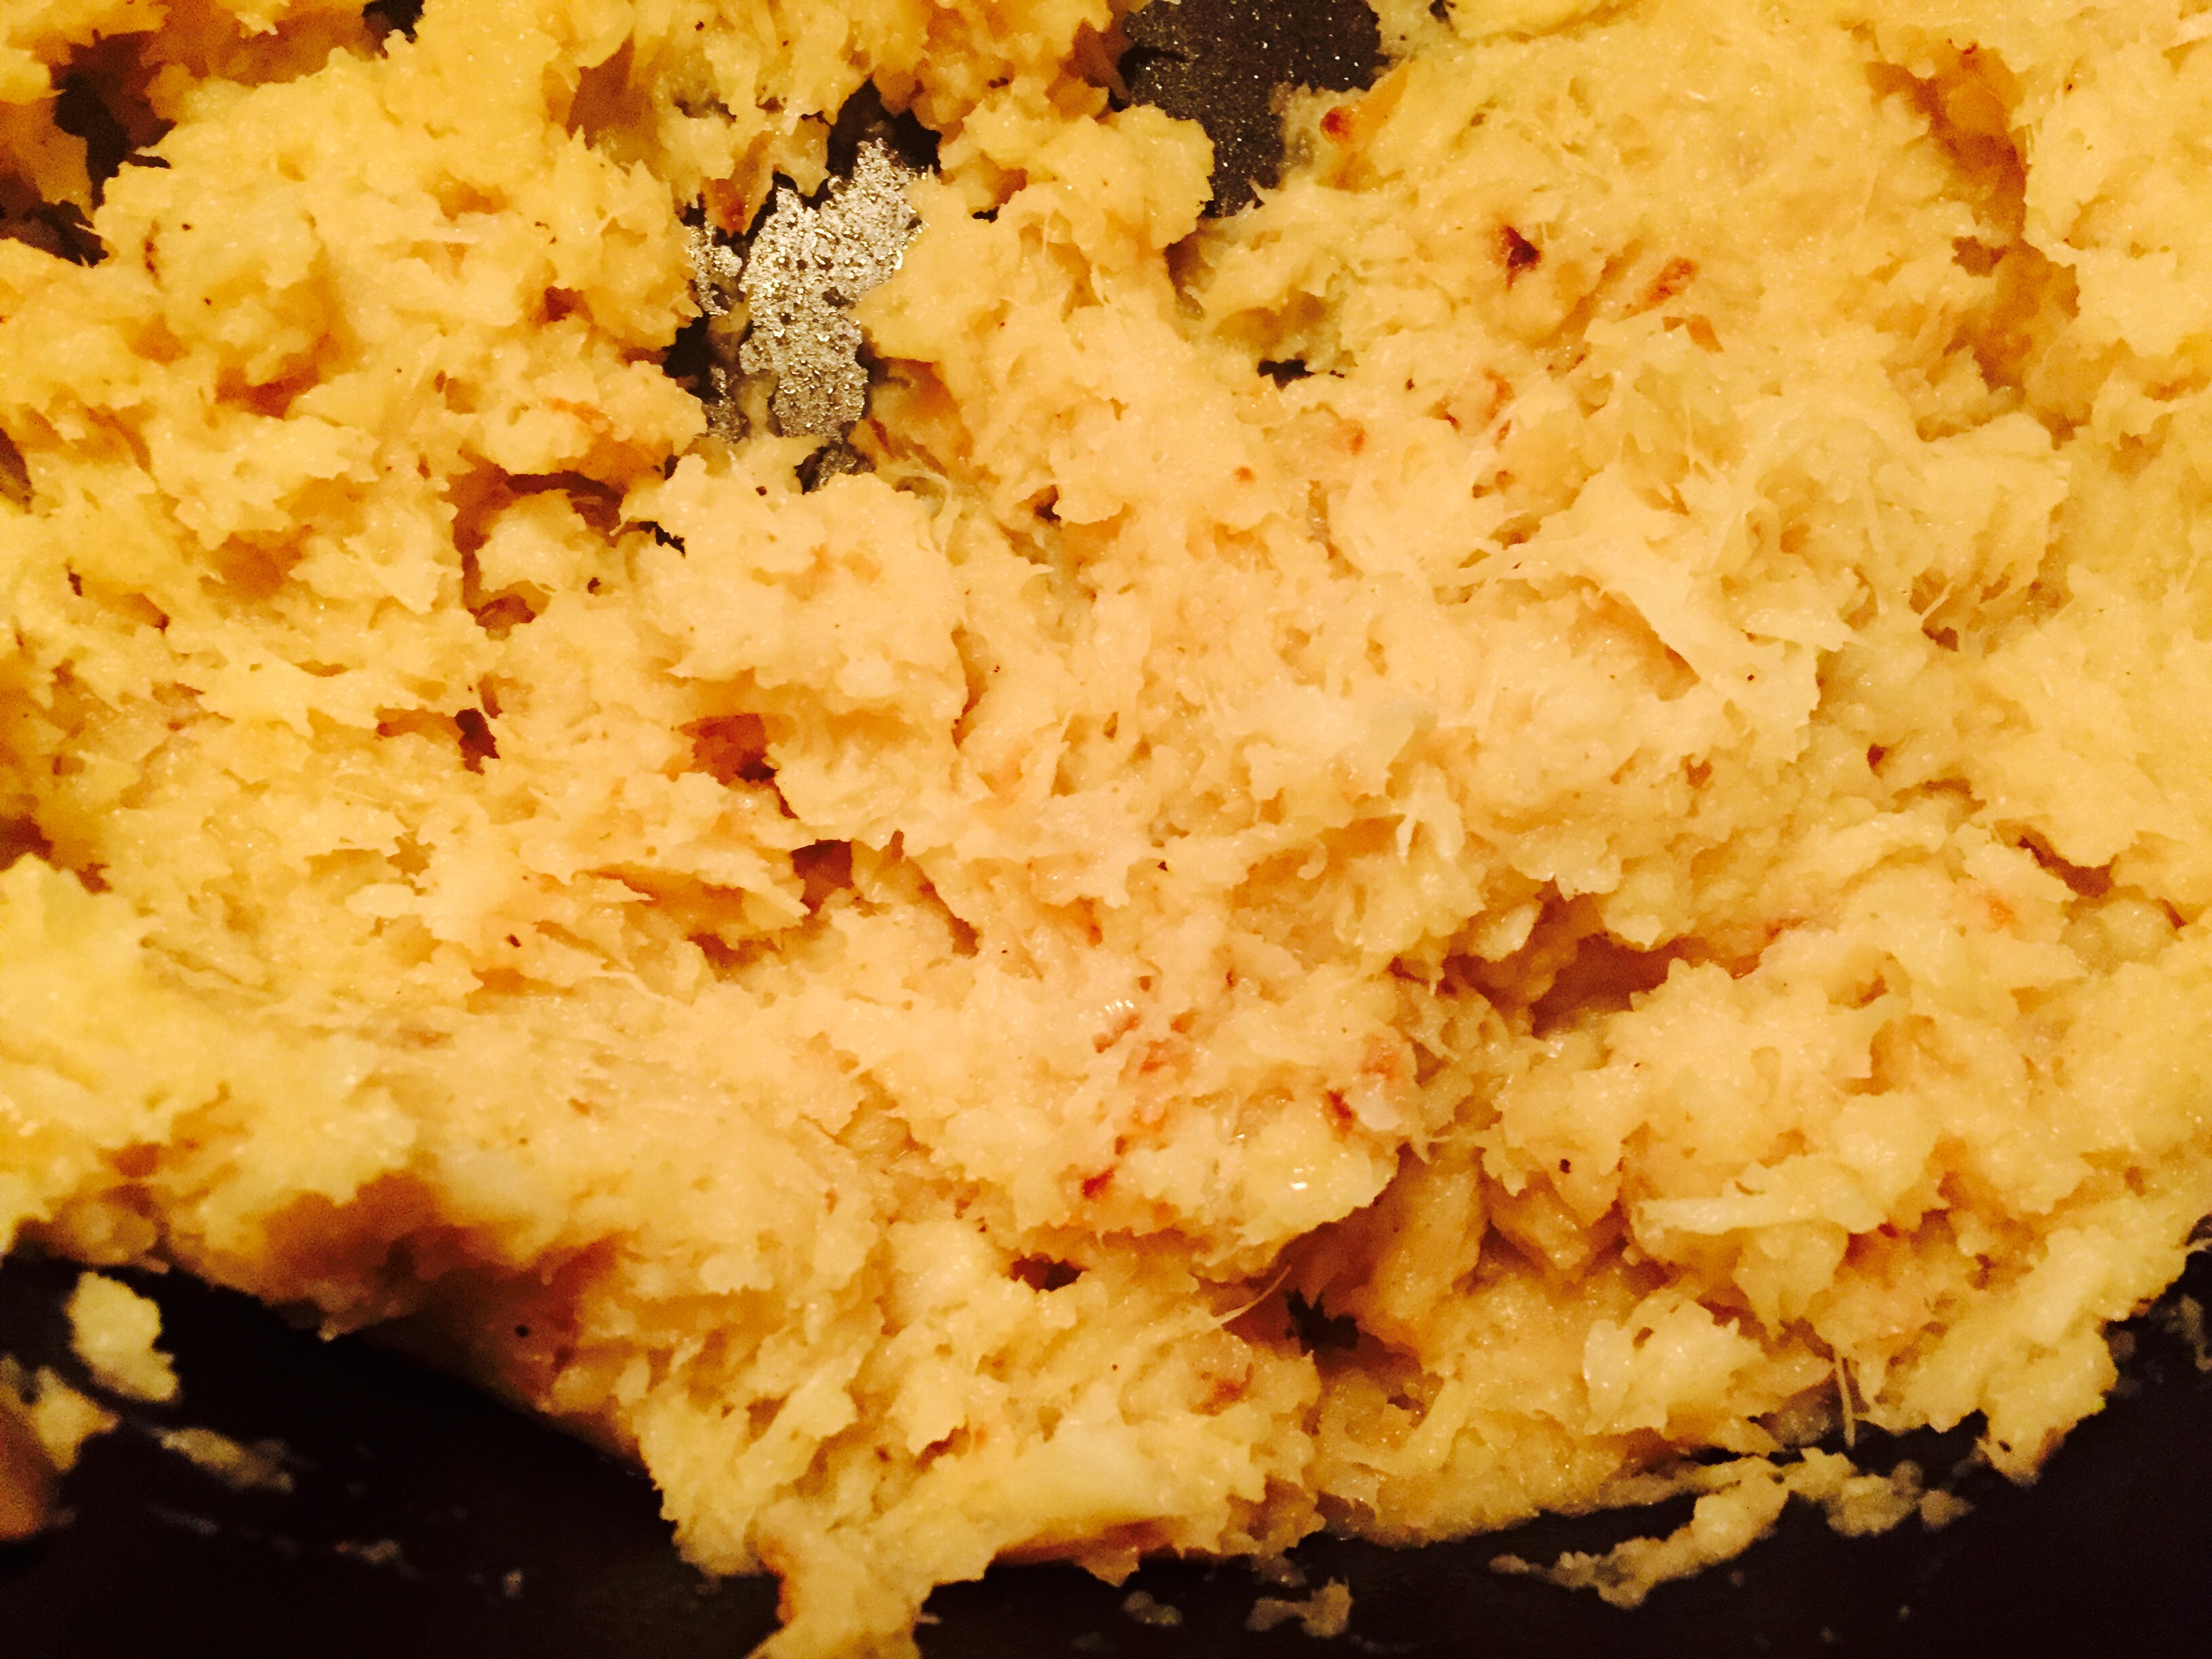 Mashed parsnips with lots of yummy sautéed garlic